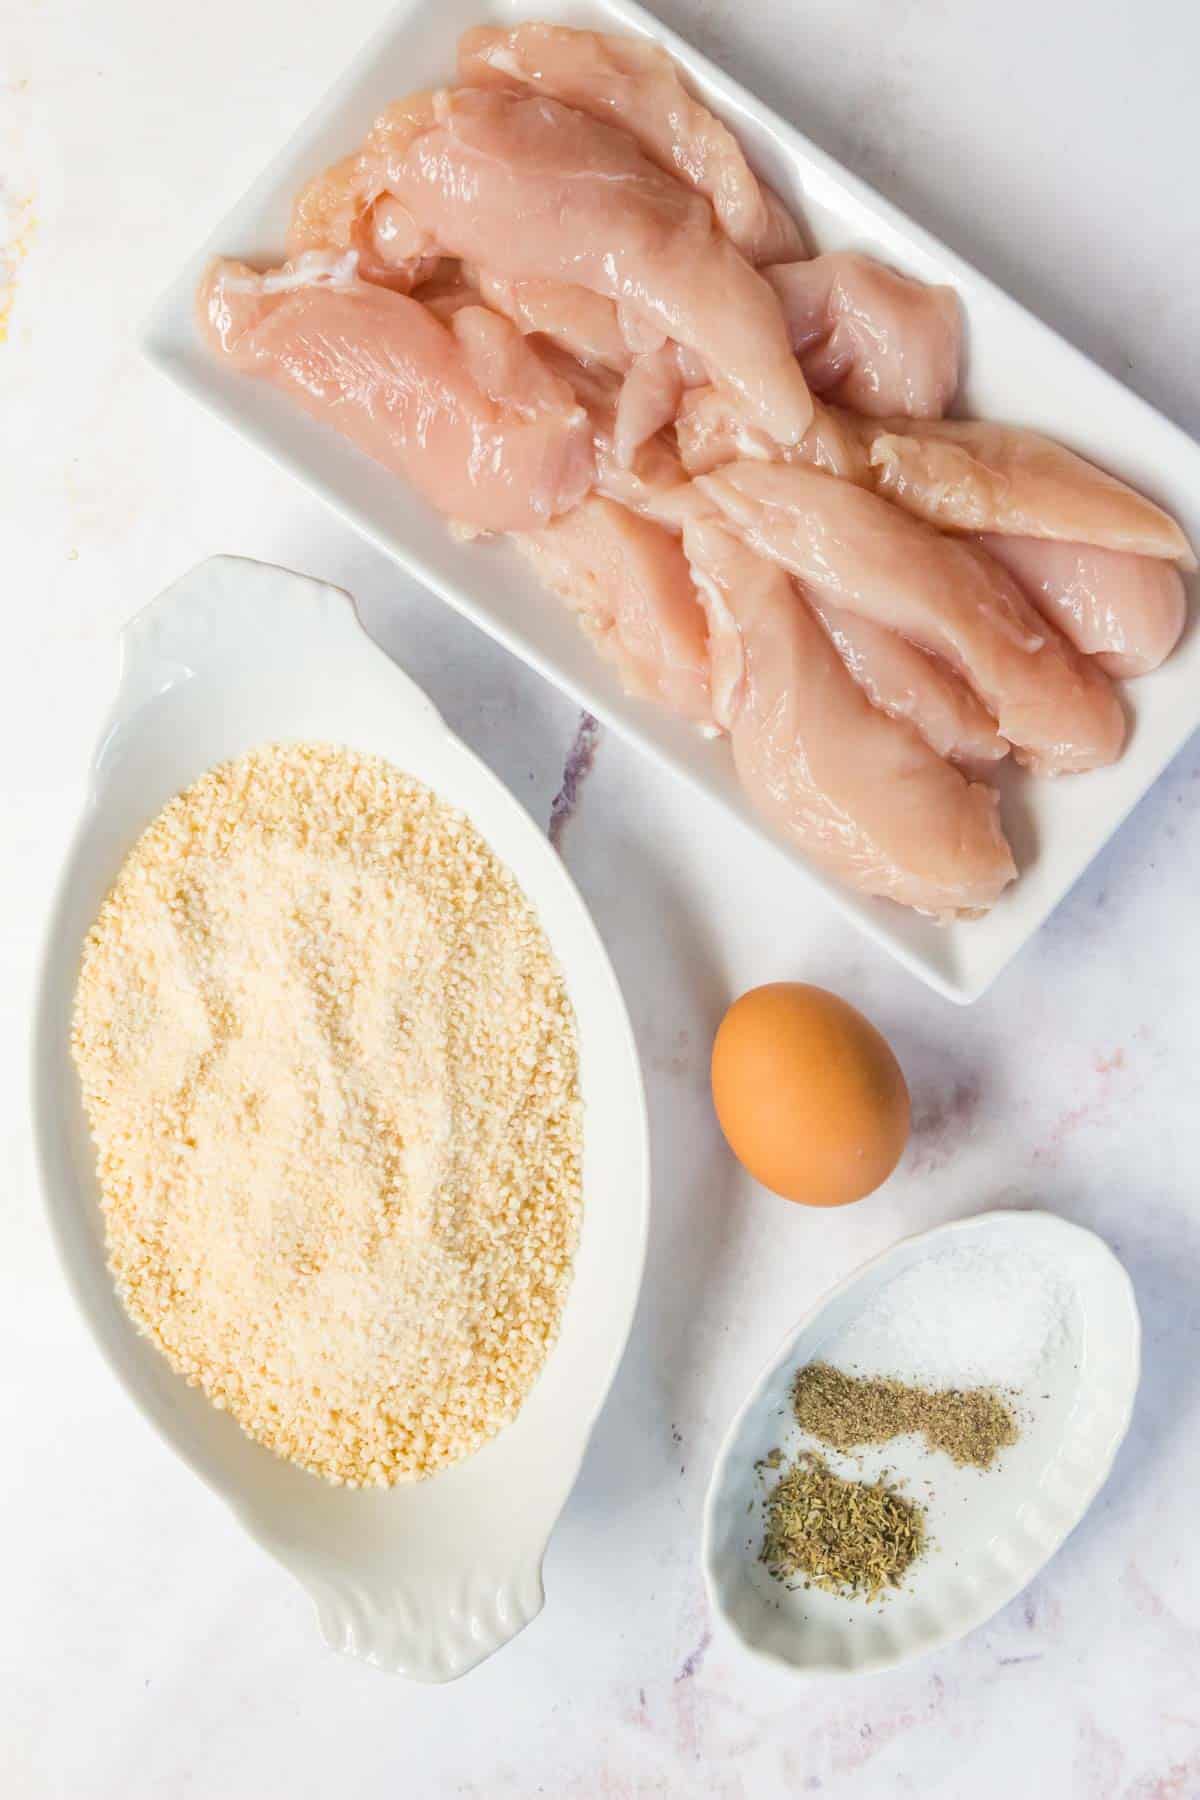 The ingredients for gluten-free baked chicken tenders.